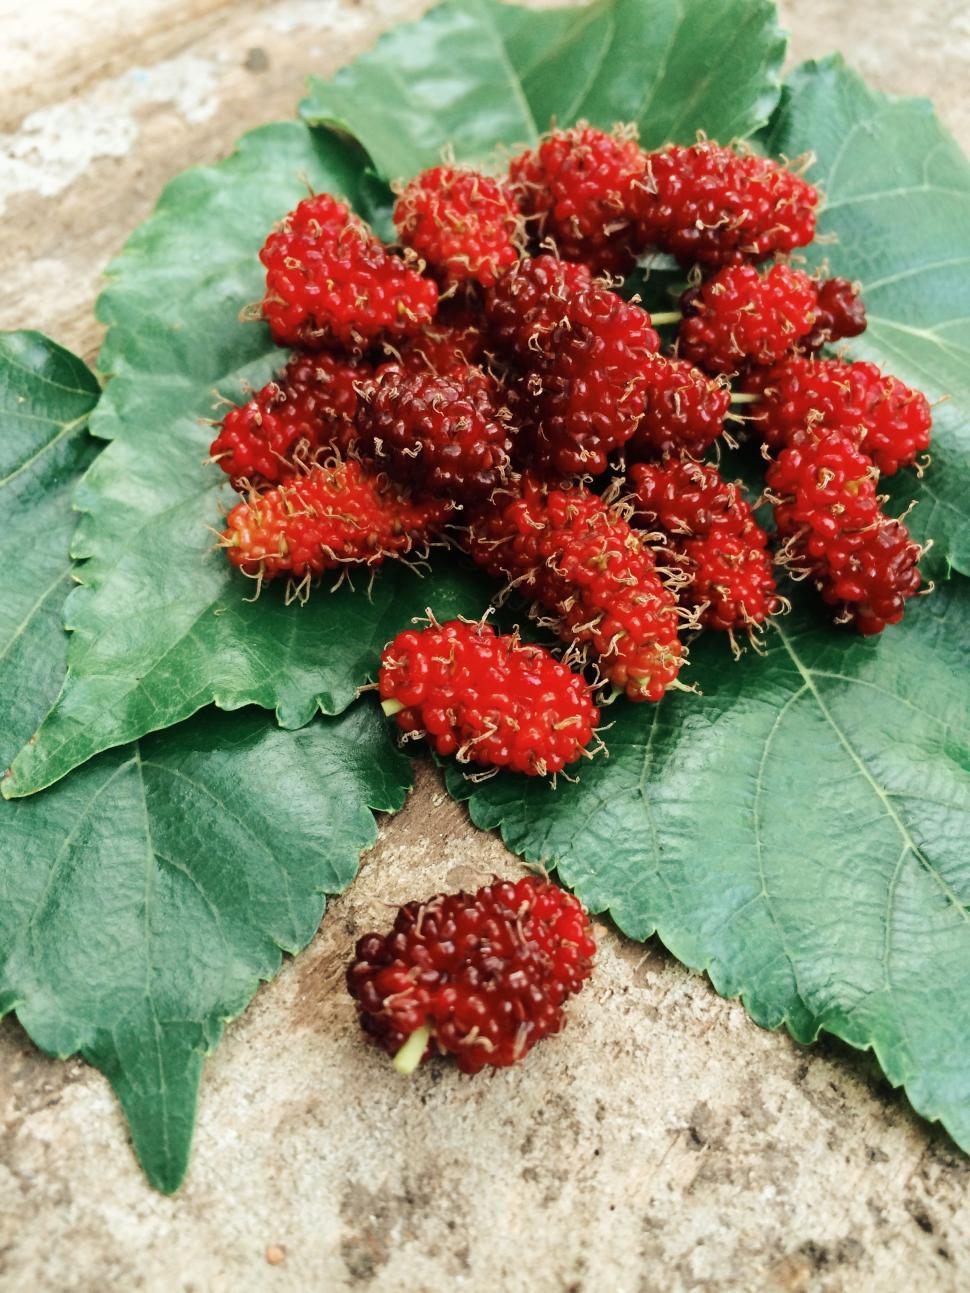 Free Image of Red Mulberries  